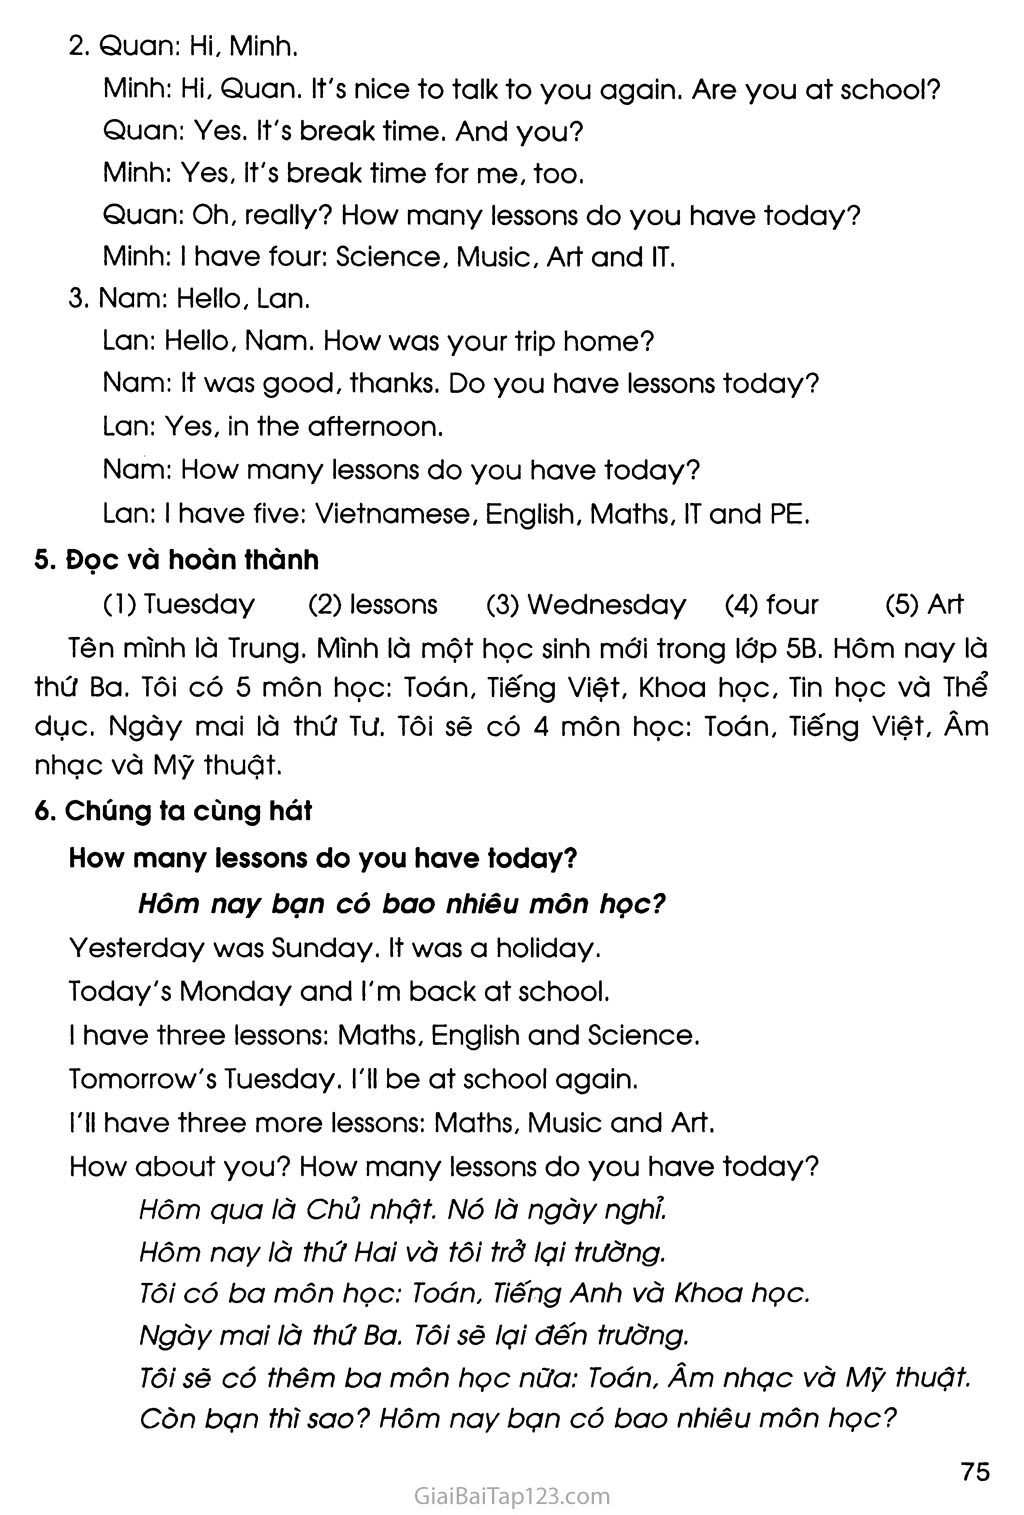 UNIT 6: HOW MANY LESSONS DO YOU HAVE TODAY? trang 7